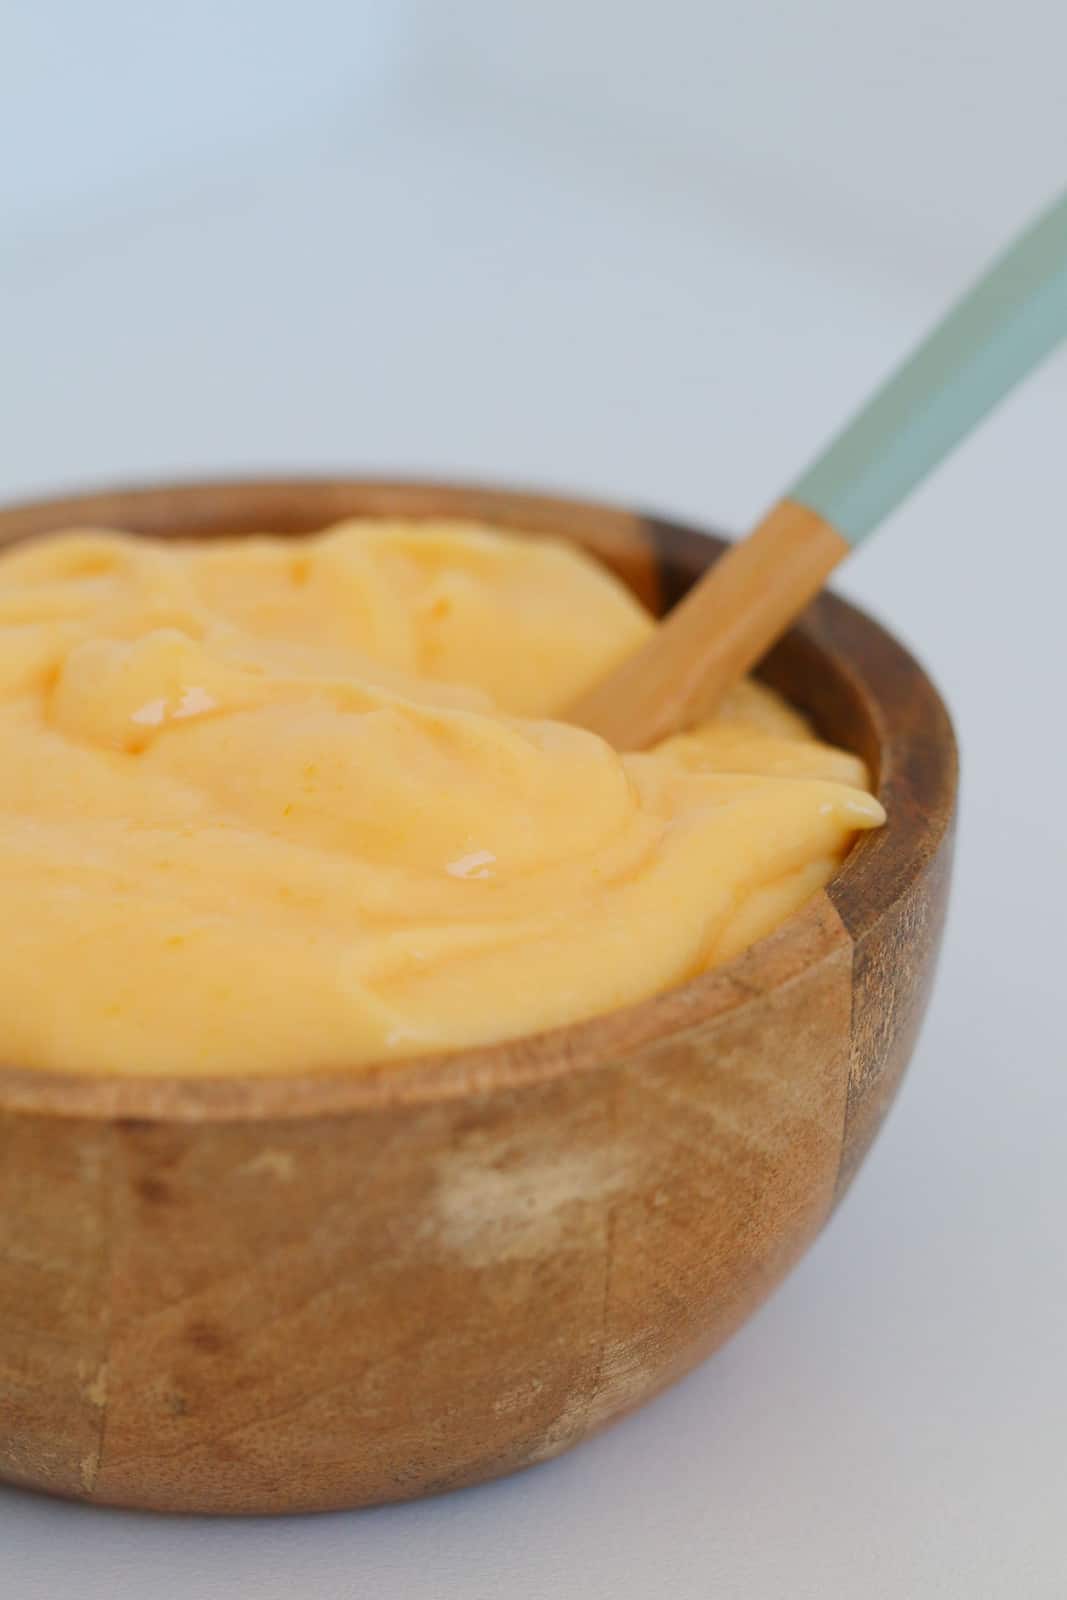 A close up of a spoon in a small wooden bowl filled with creamy yellow lemon curd.